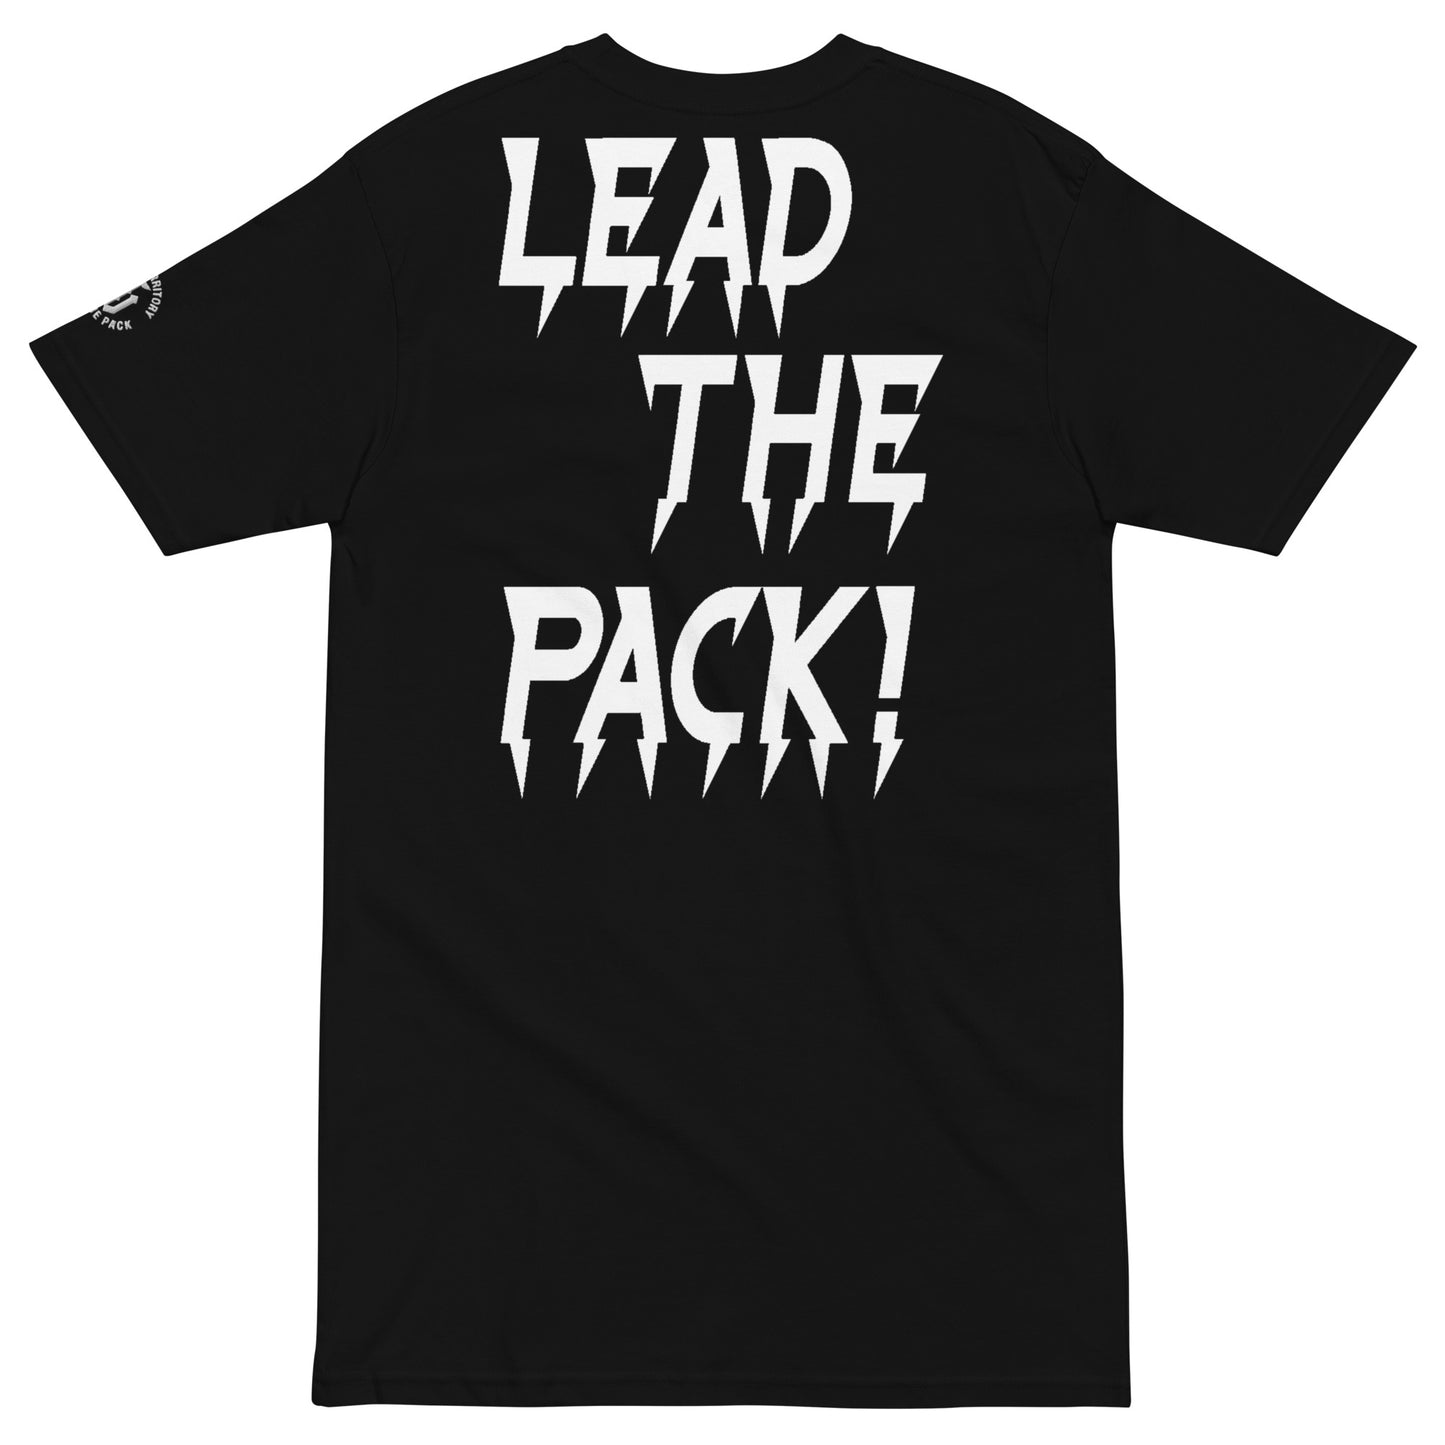 Wolf Territory - Lead The Pack Tee!